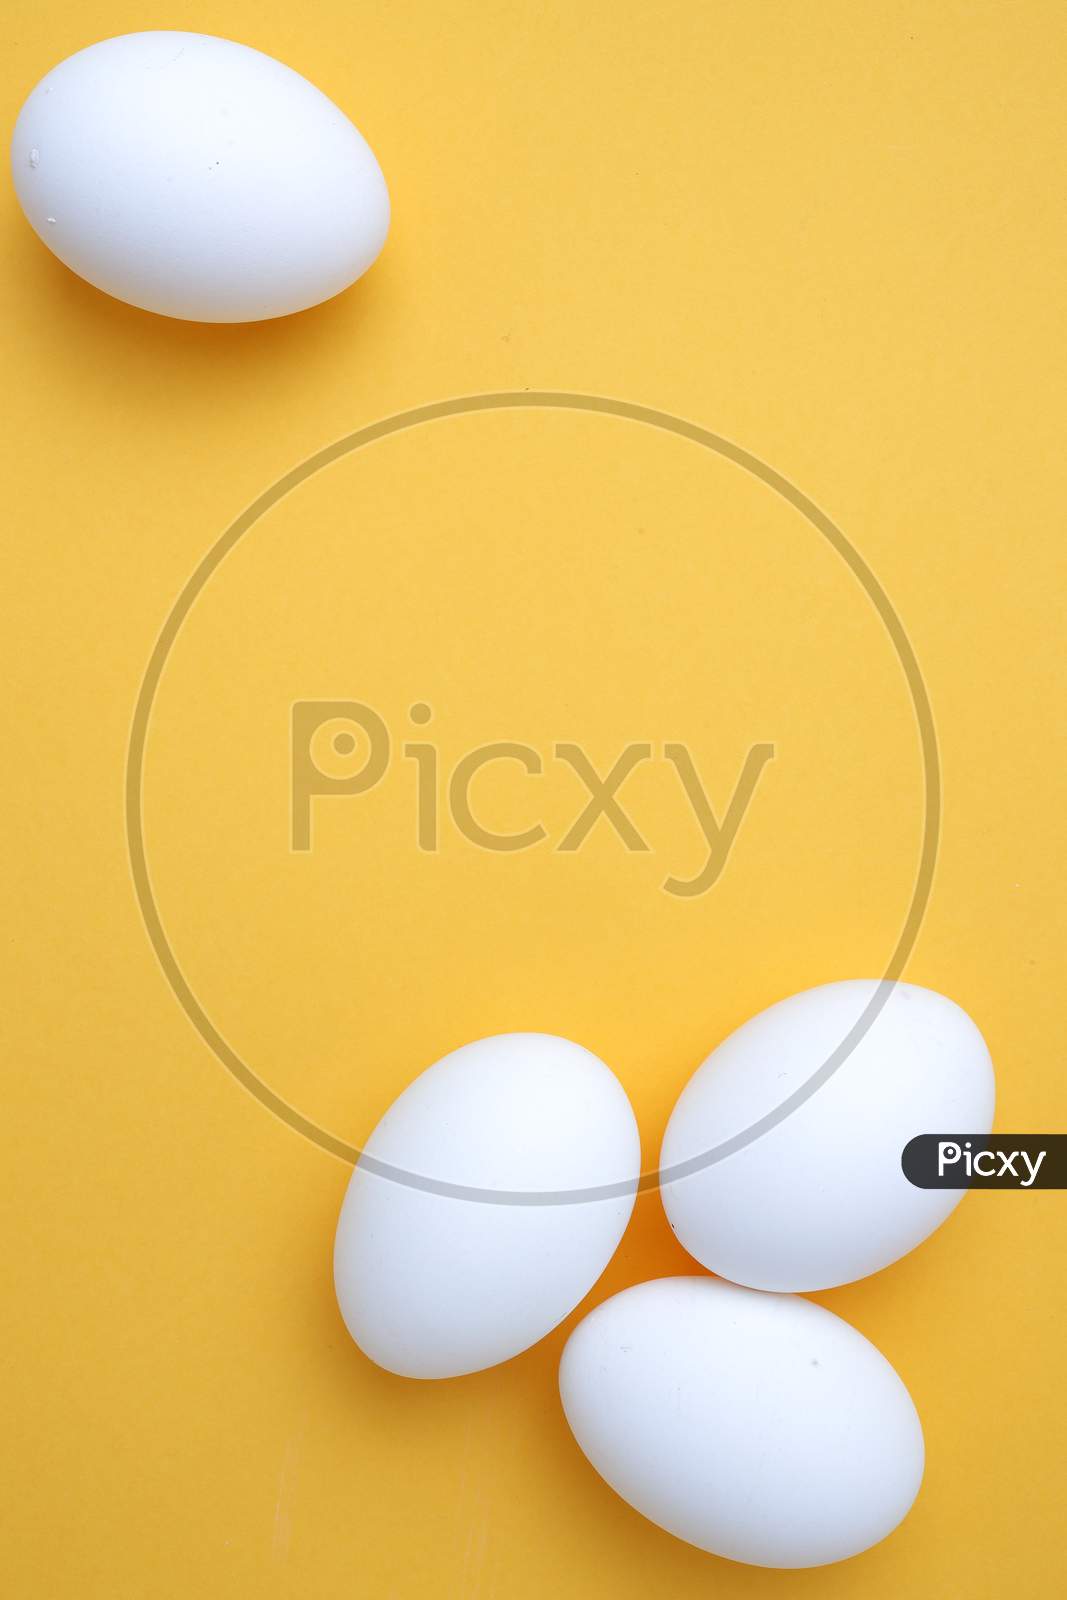 White Egg On The Yellow Background In Center,Copy Space For The Ads